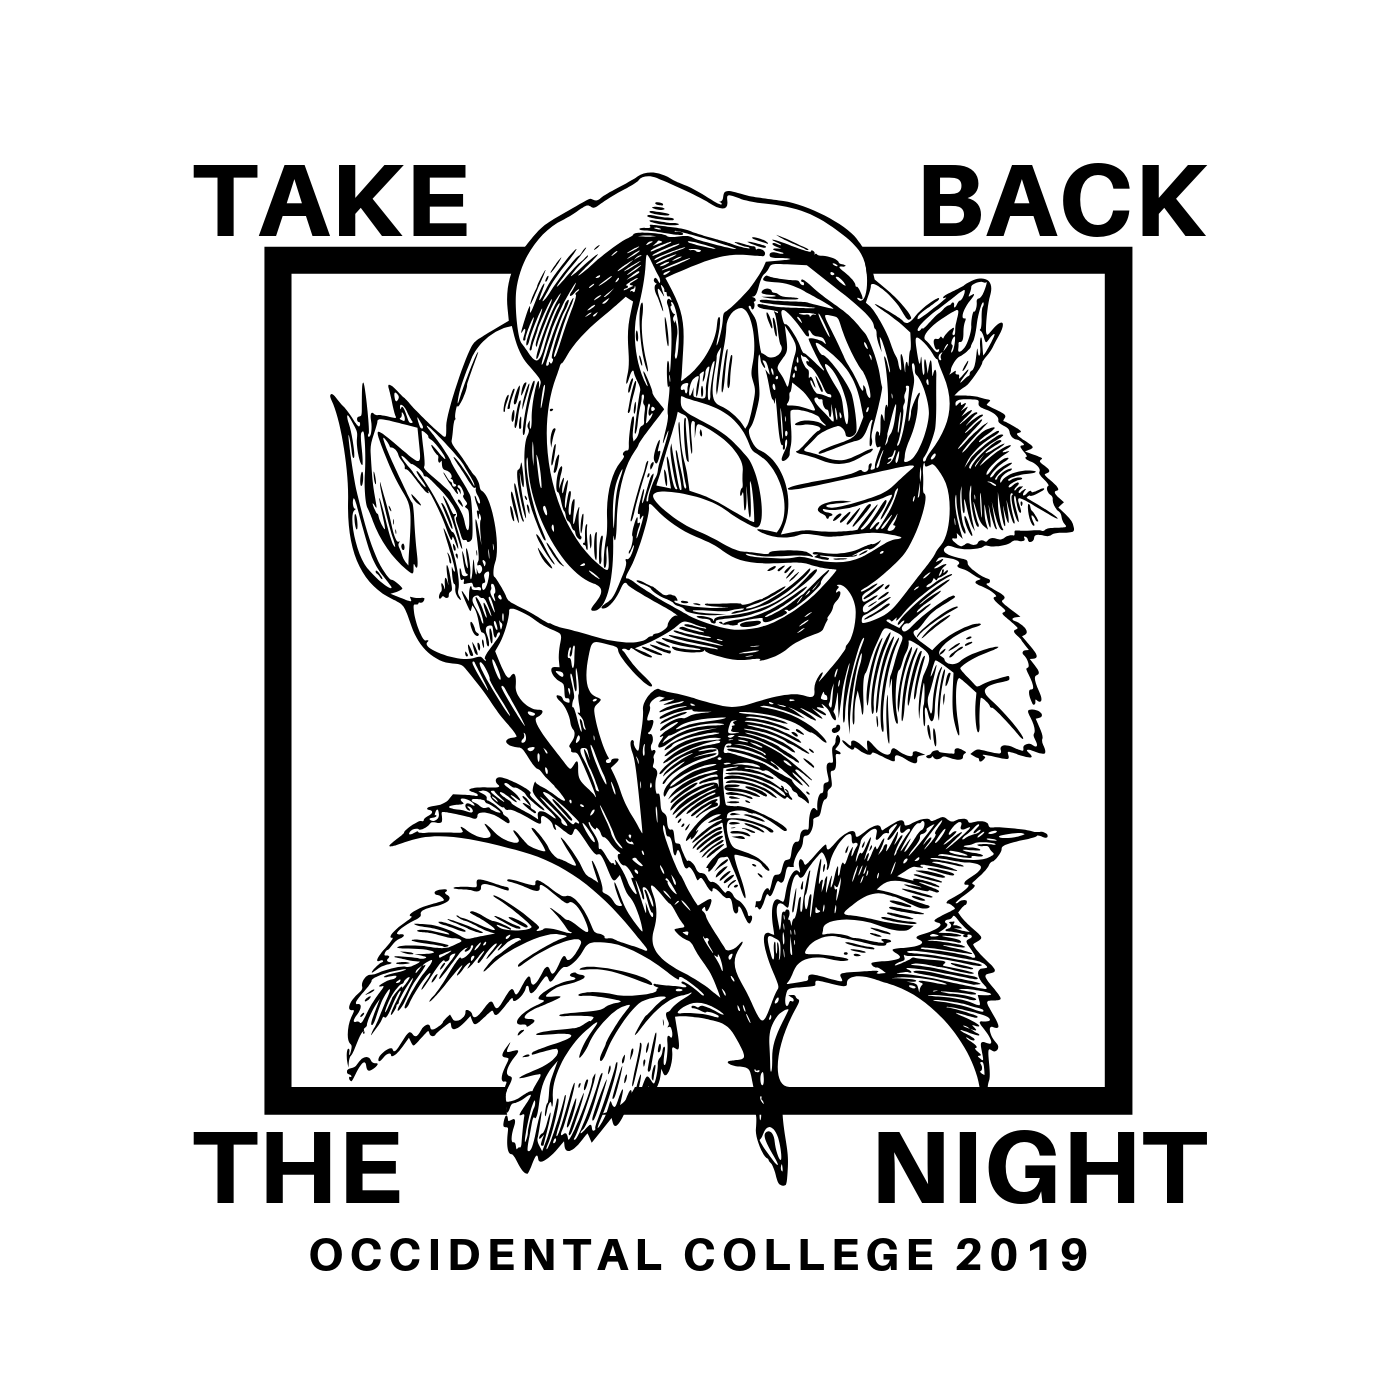 A black and white image featuring a drawing of a blooming rose with thorns on the stem, a black square around it, and the words Take Back the Night written around the square. At the bottom of the image, it is written Occidental College 2019.